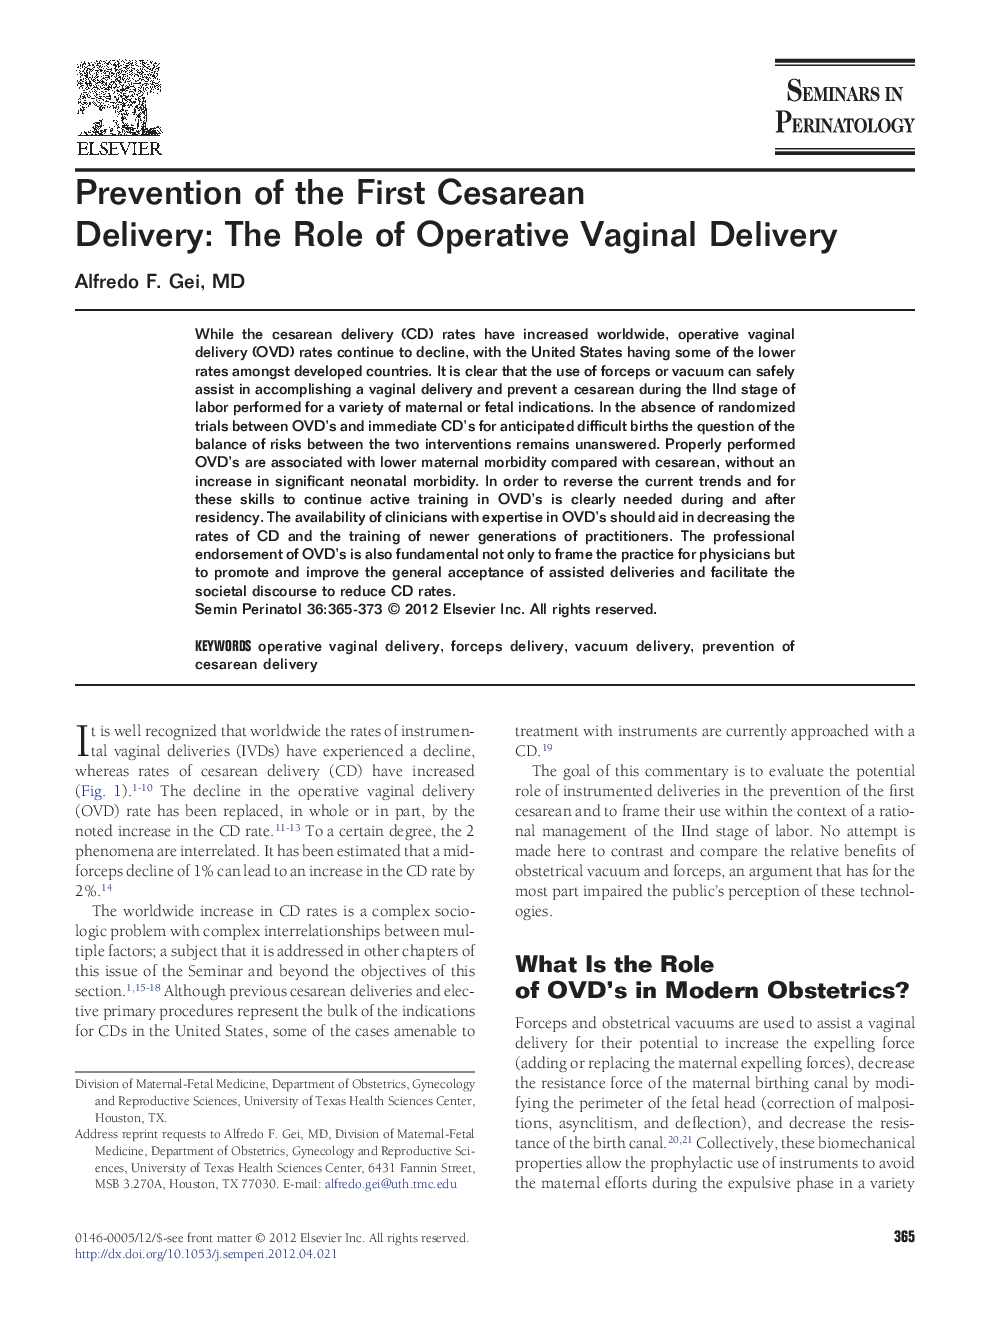 Prevention of the First Cesarean Delivery: The Role of Operative Vaginal Delivery